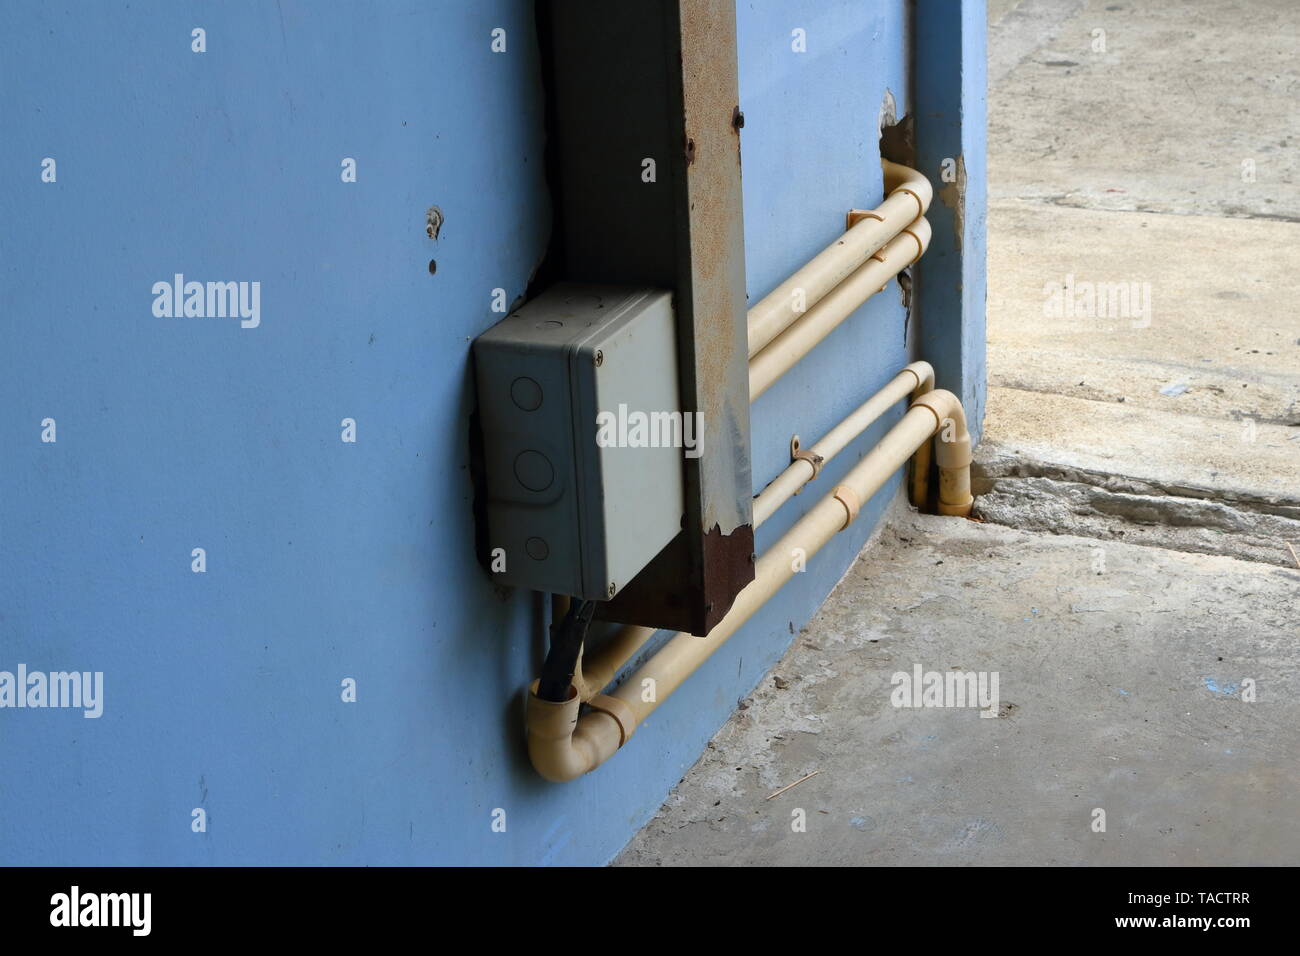 Closeup of  junction box and wireway connected to electrical pipes for power distribution, connection concept Stock Photo